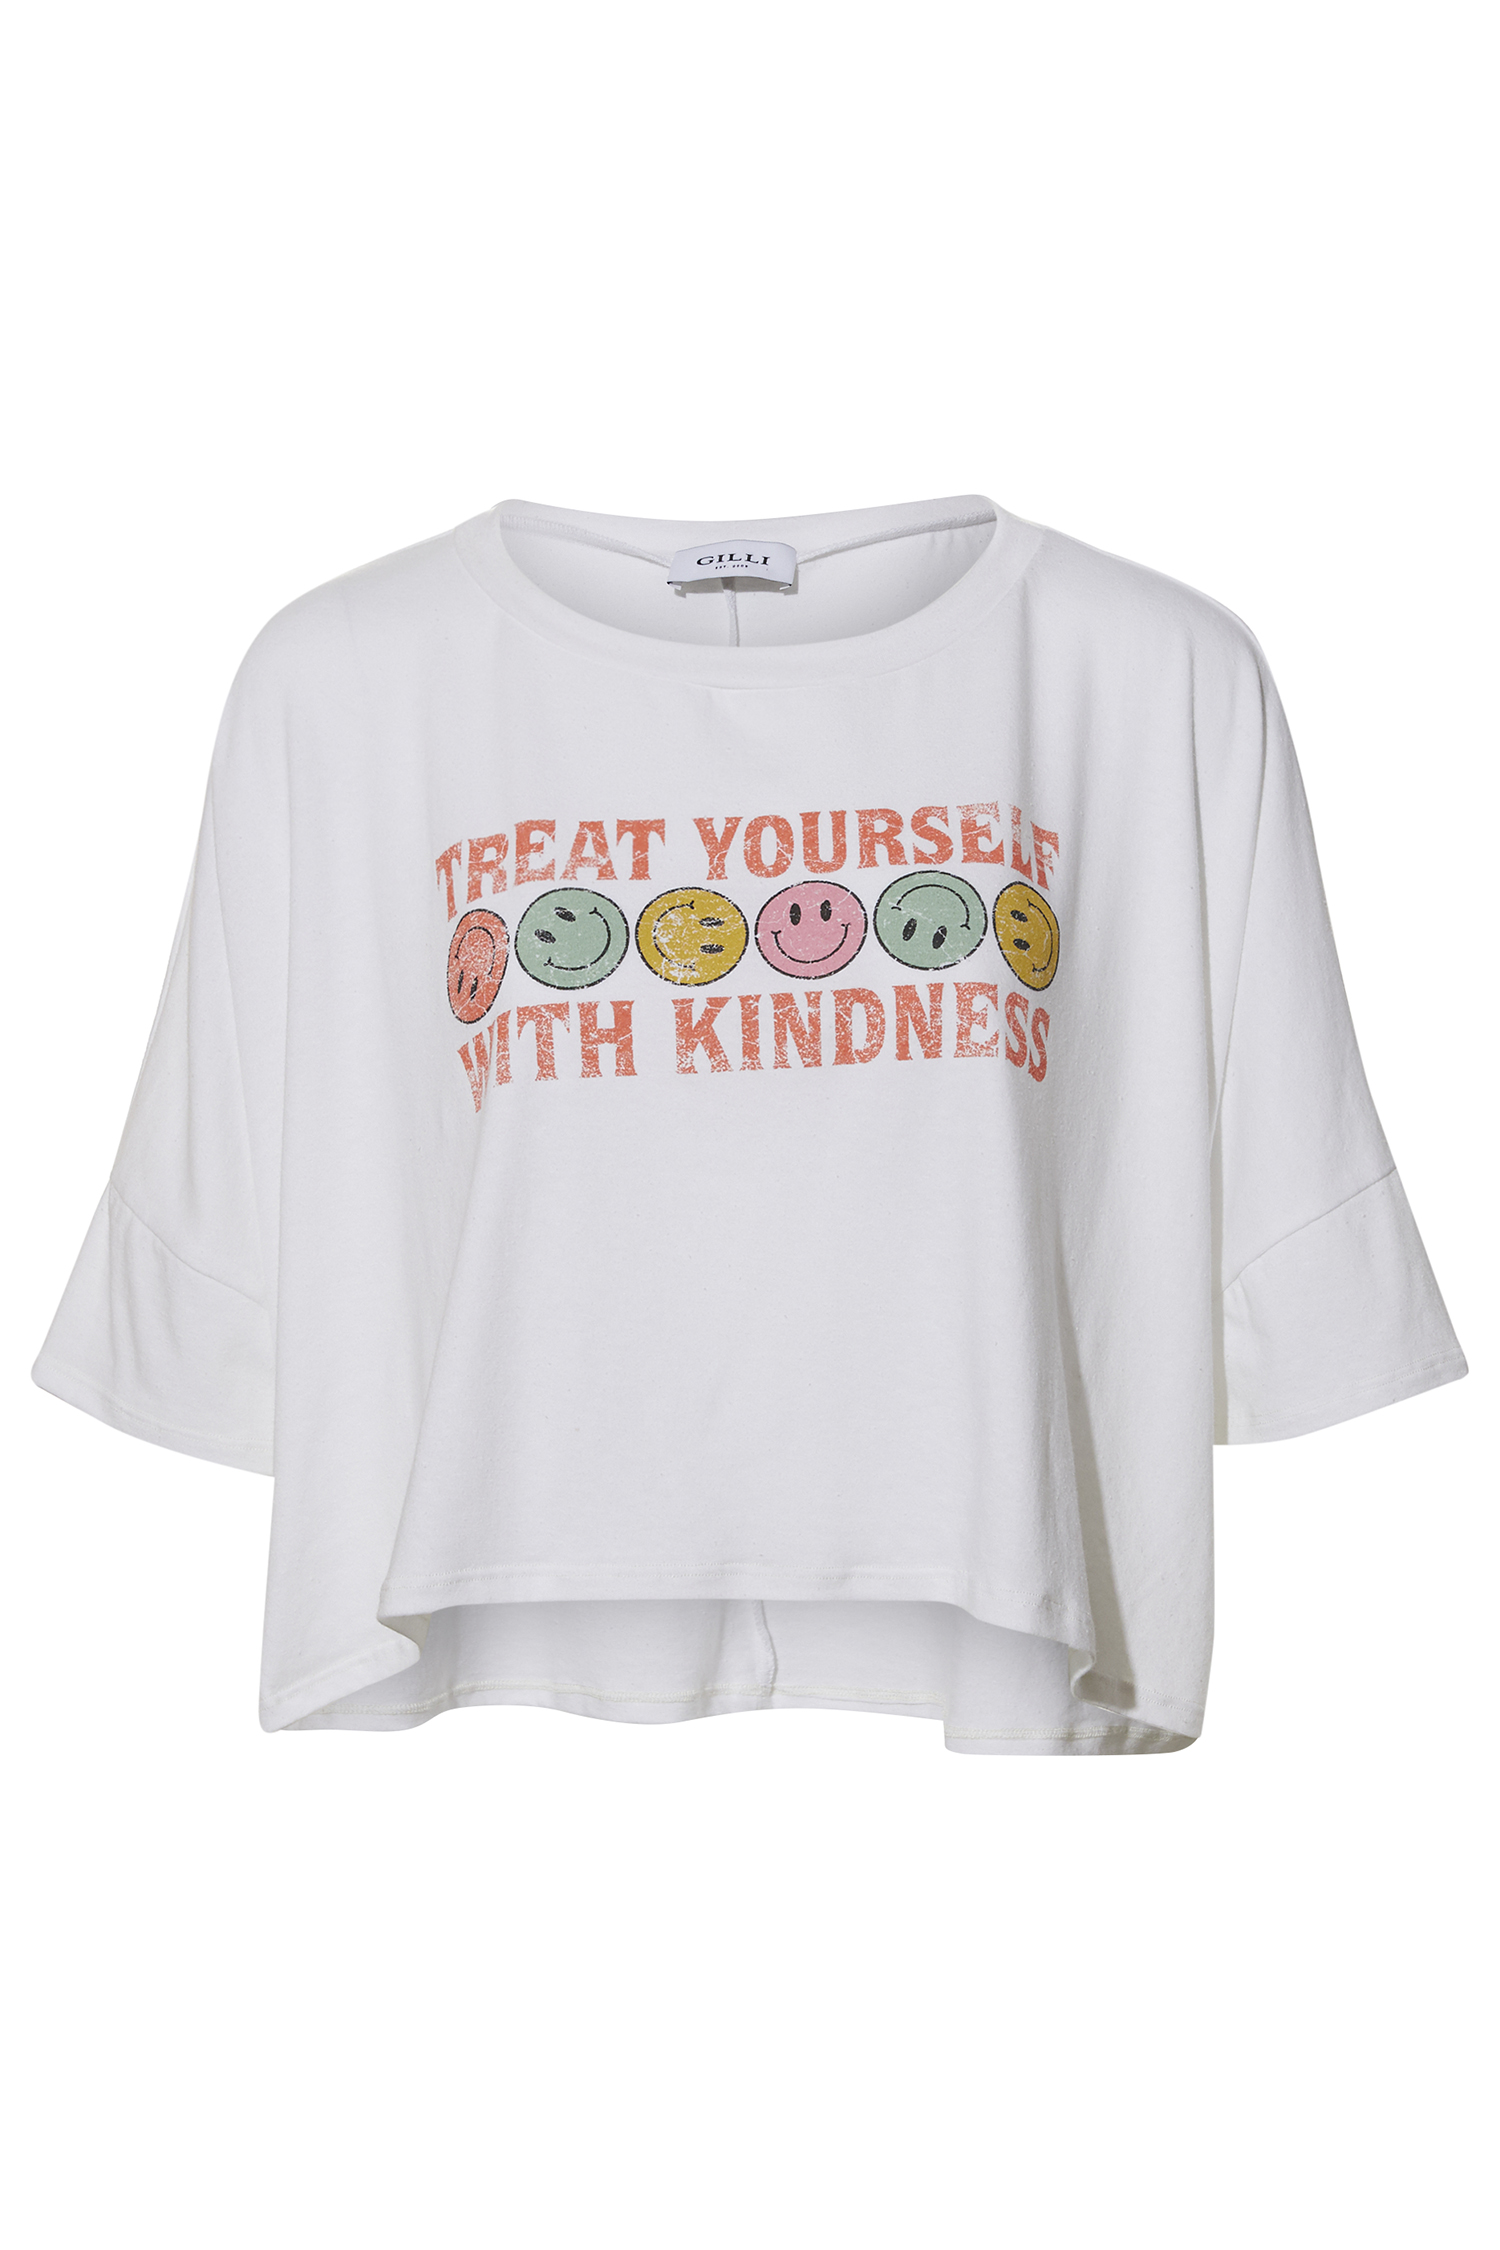 Treat Yourself with Kindness Top